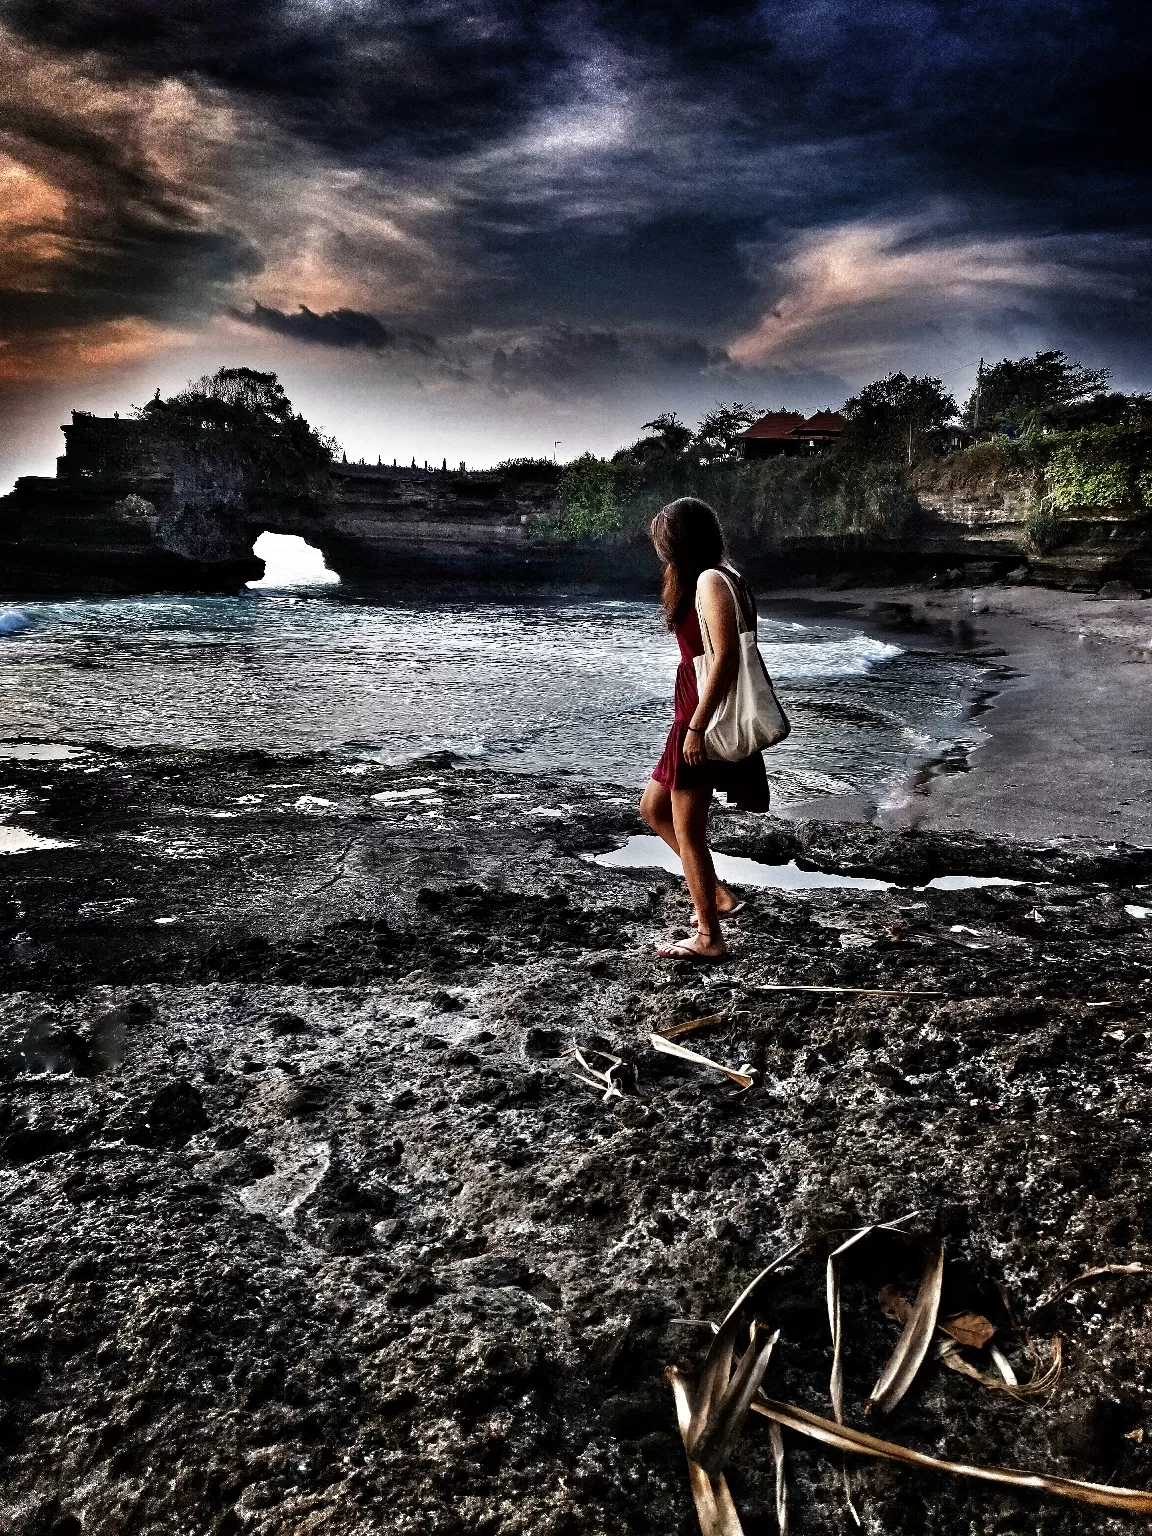 Photo of Tanah Lot Temple By Nikhar Loonker